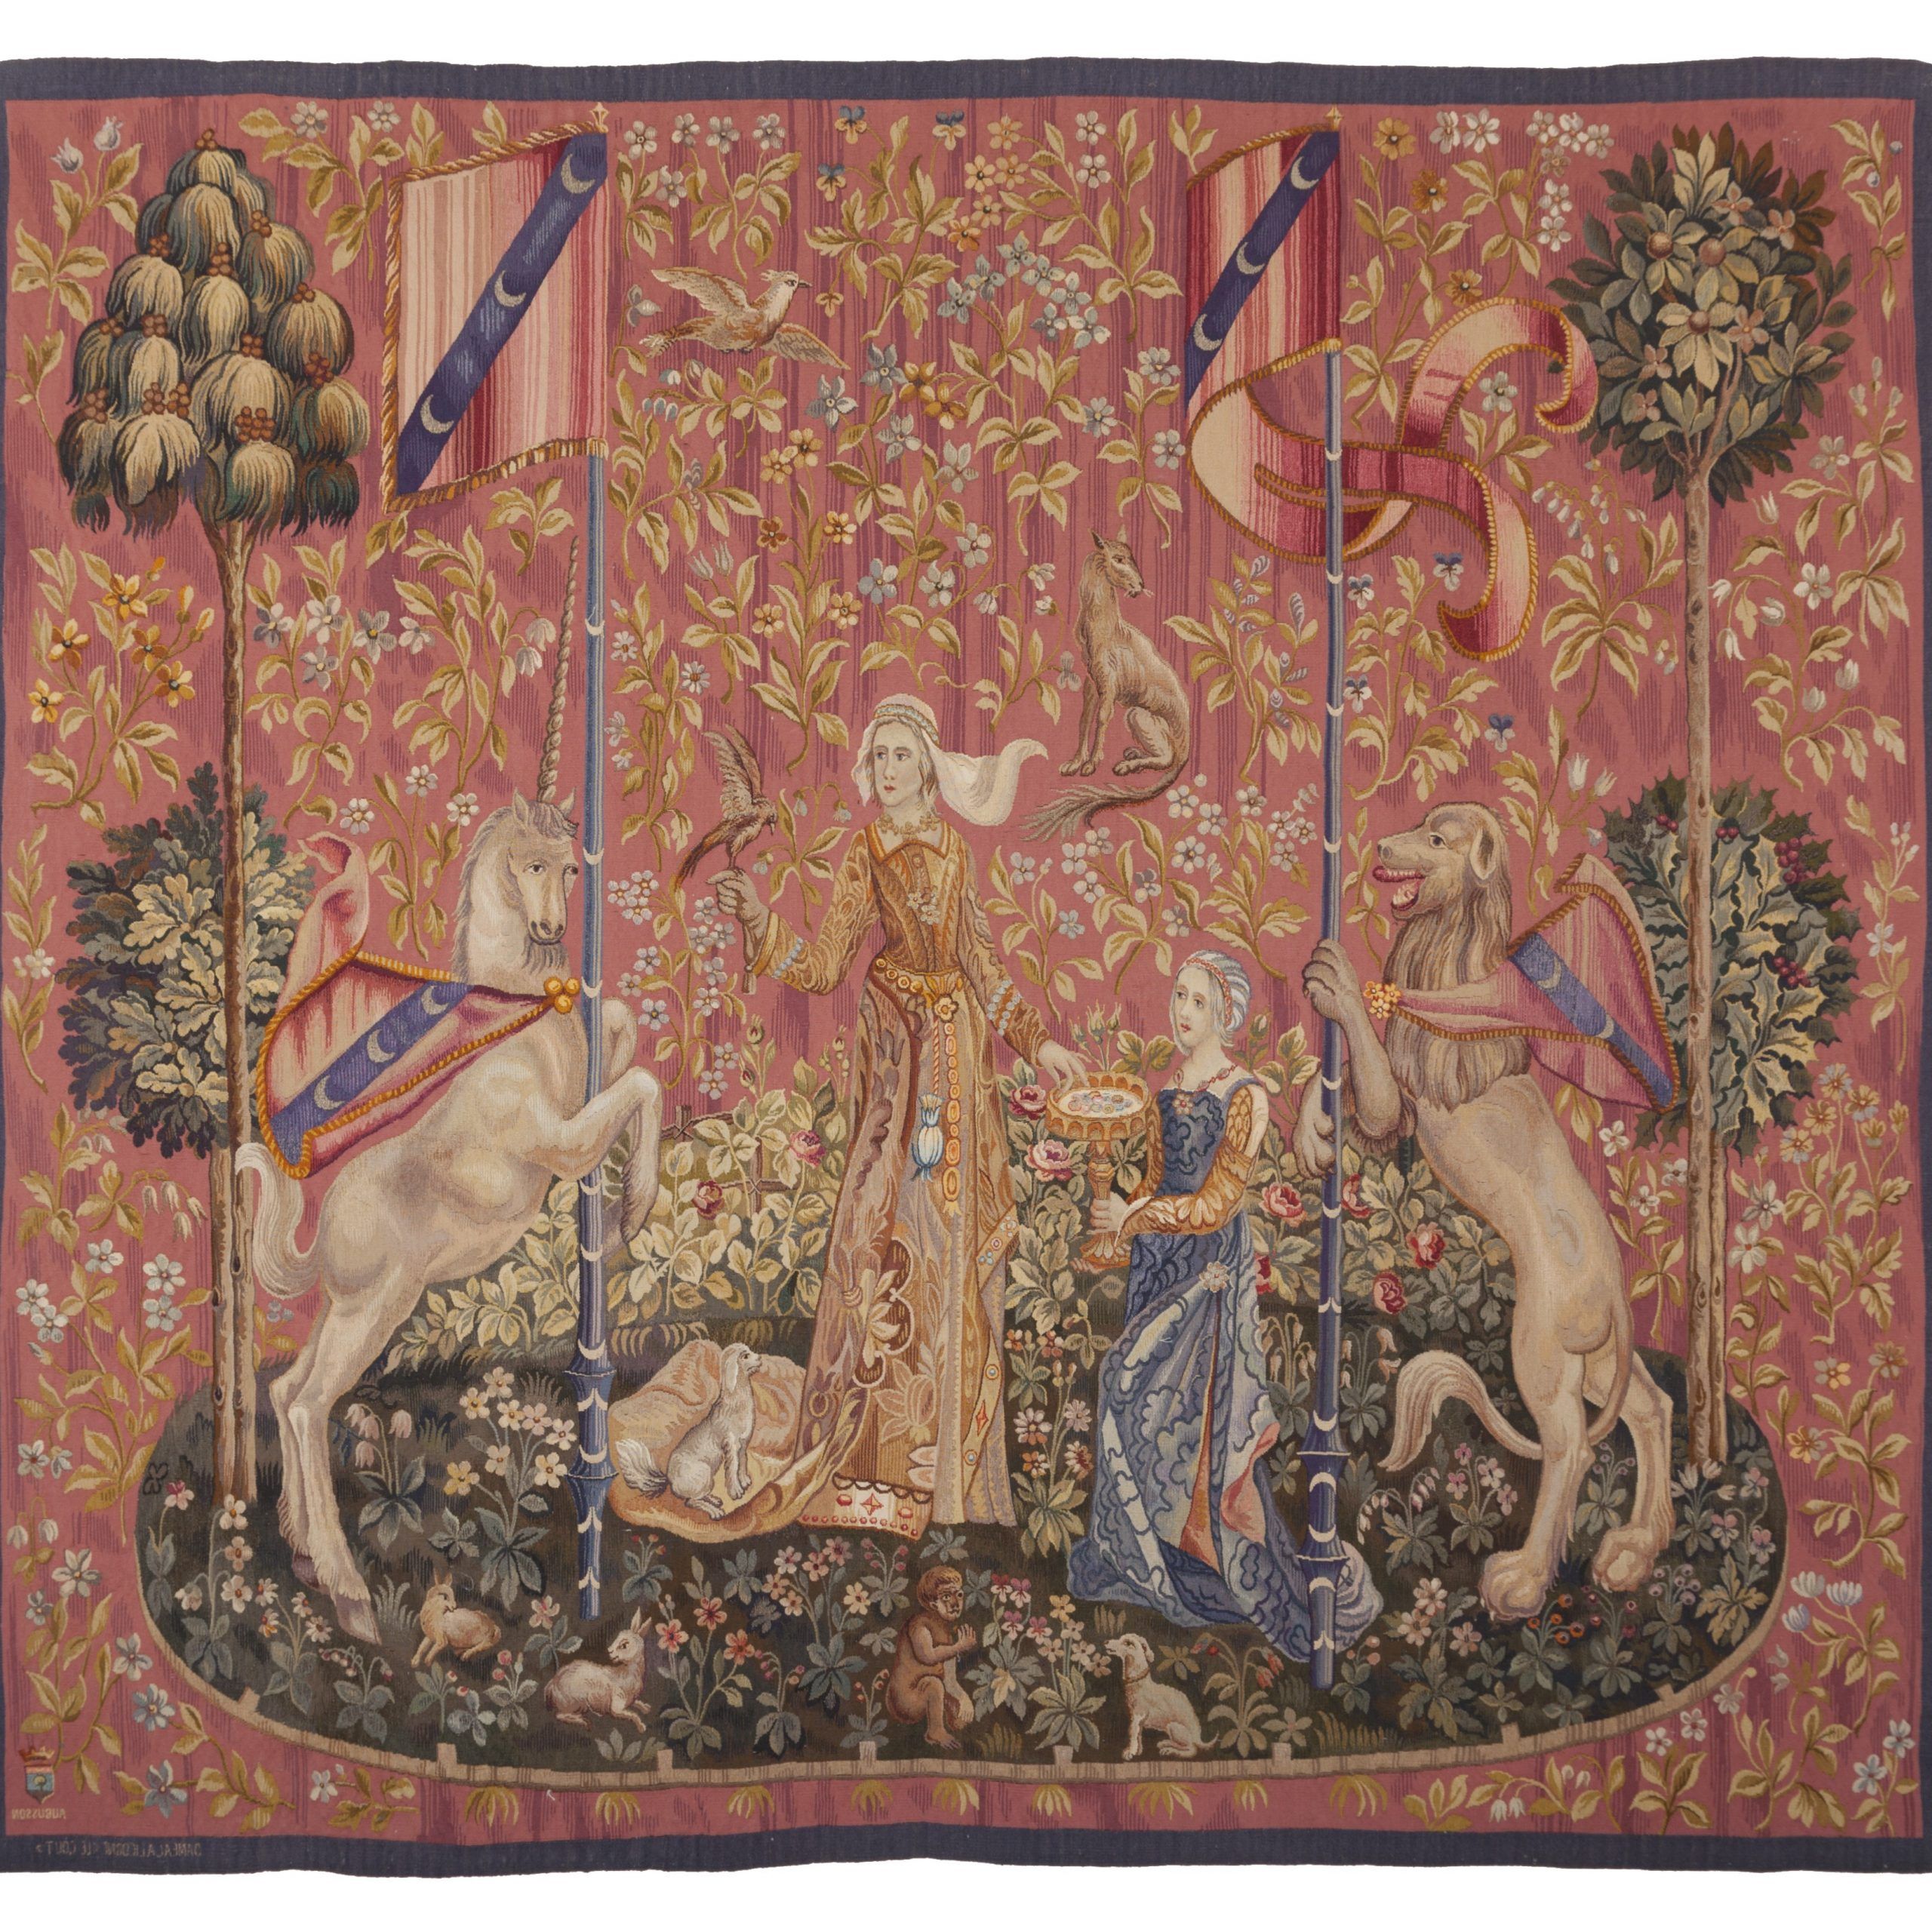 Dame A La Licorne 'le Gout' Antique Original Tapestry Throughout Most Recently Released Dame A La Licorne I Tapestries (View 9 of 20)